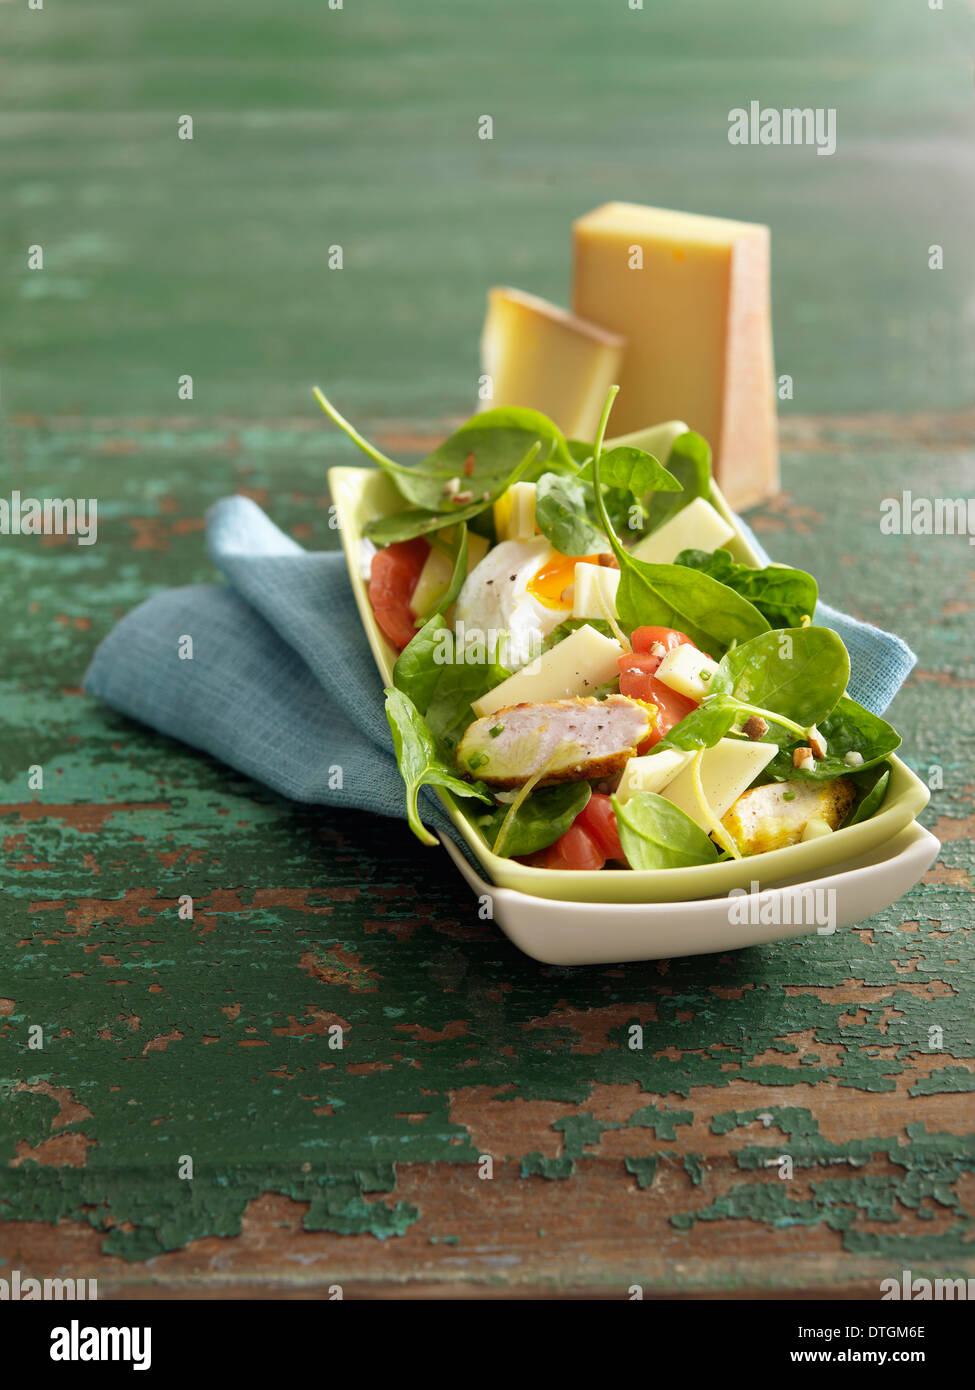 Spinach,chicken,soft-boiled egg and Abondance cheese salad Stock Photo